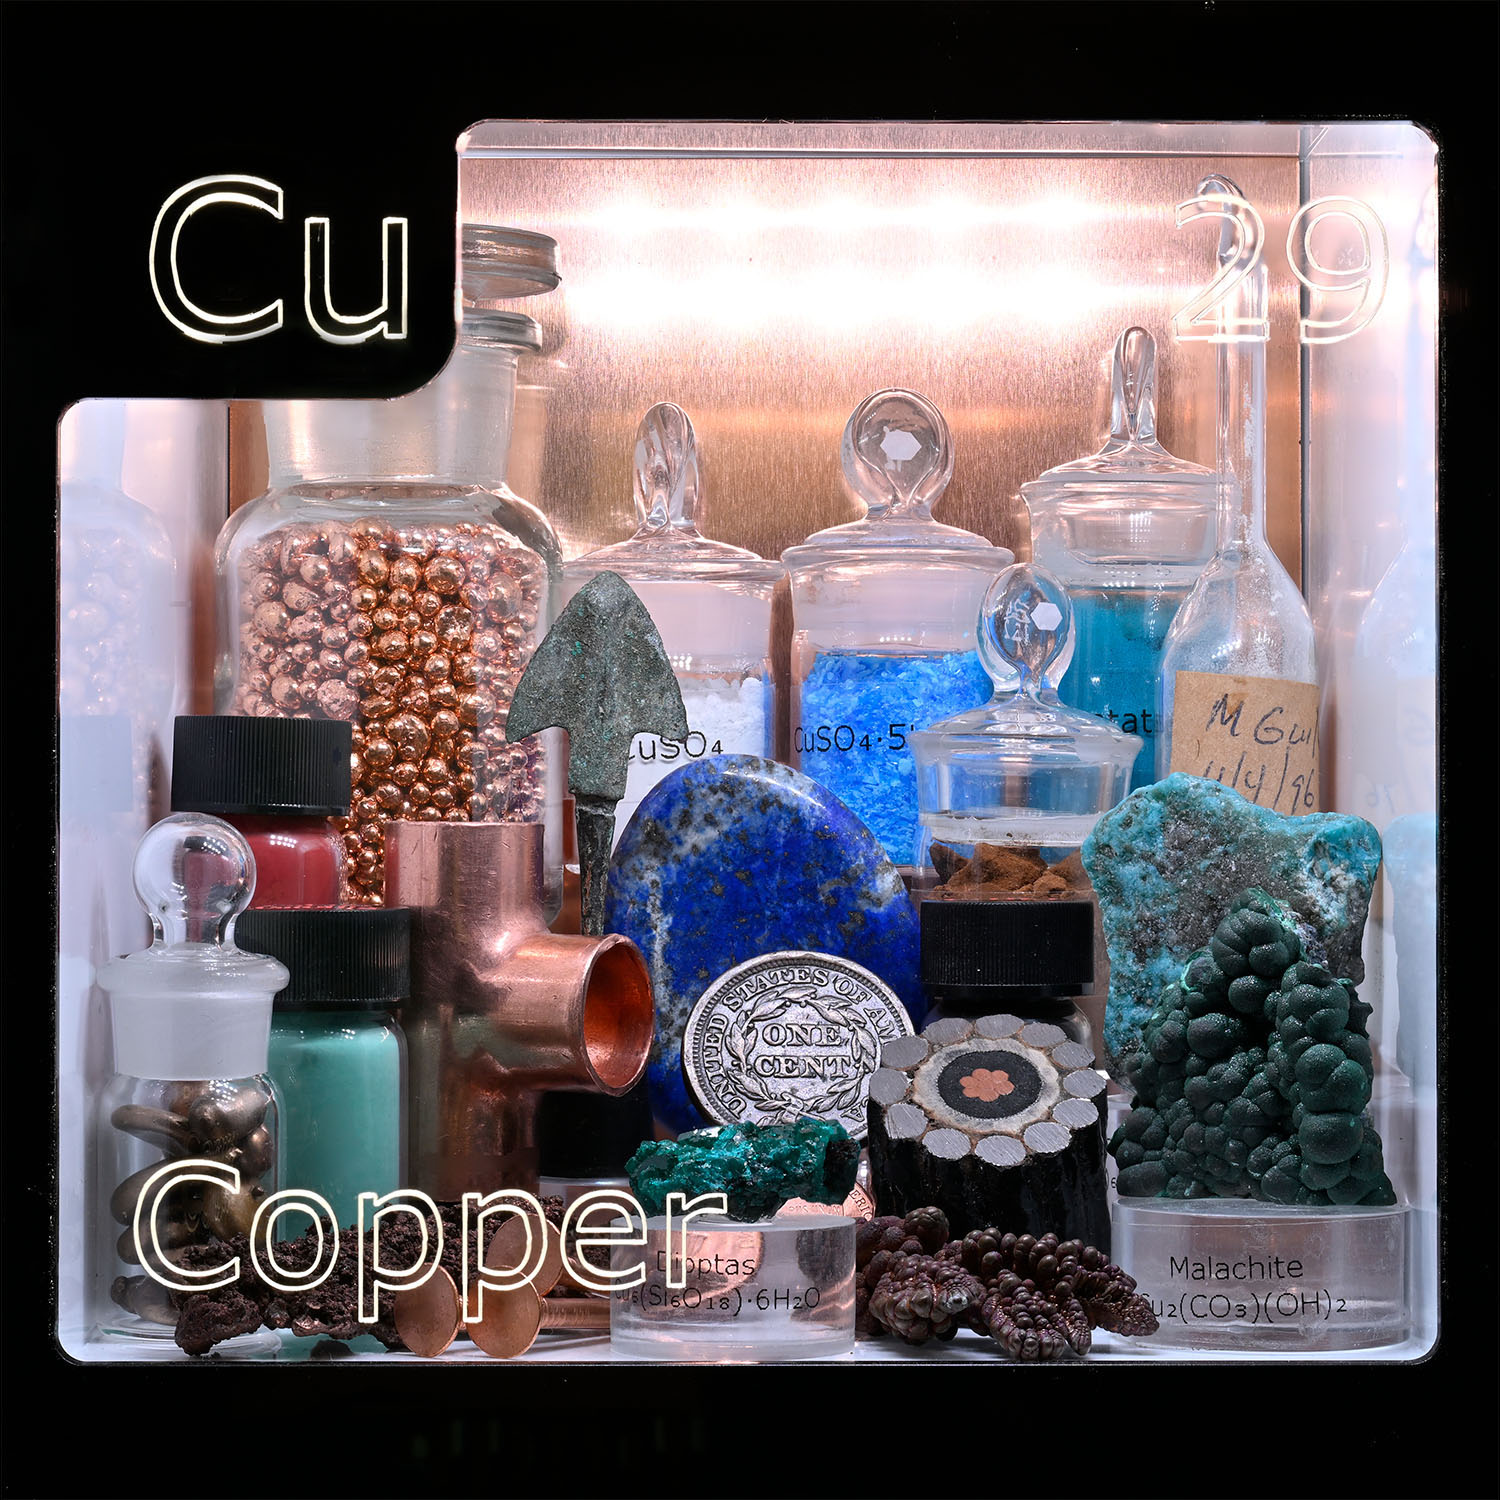 Periodic Table Display - close up of Copper and the items that contain that element